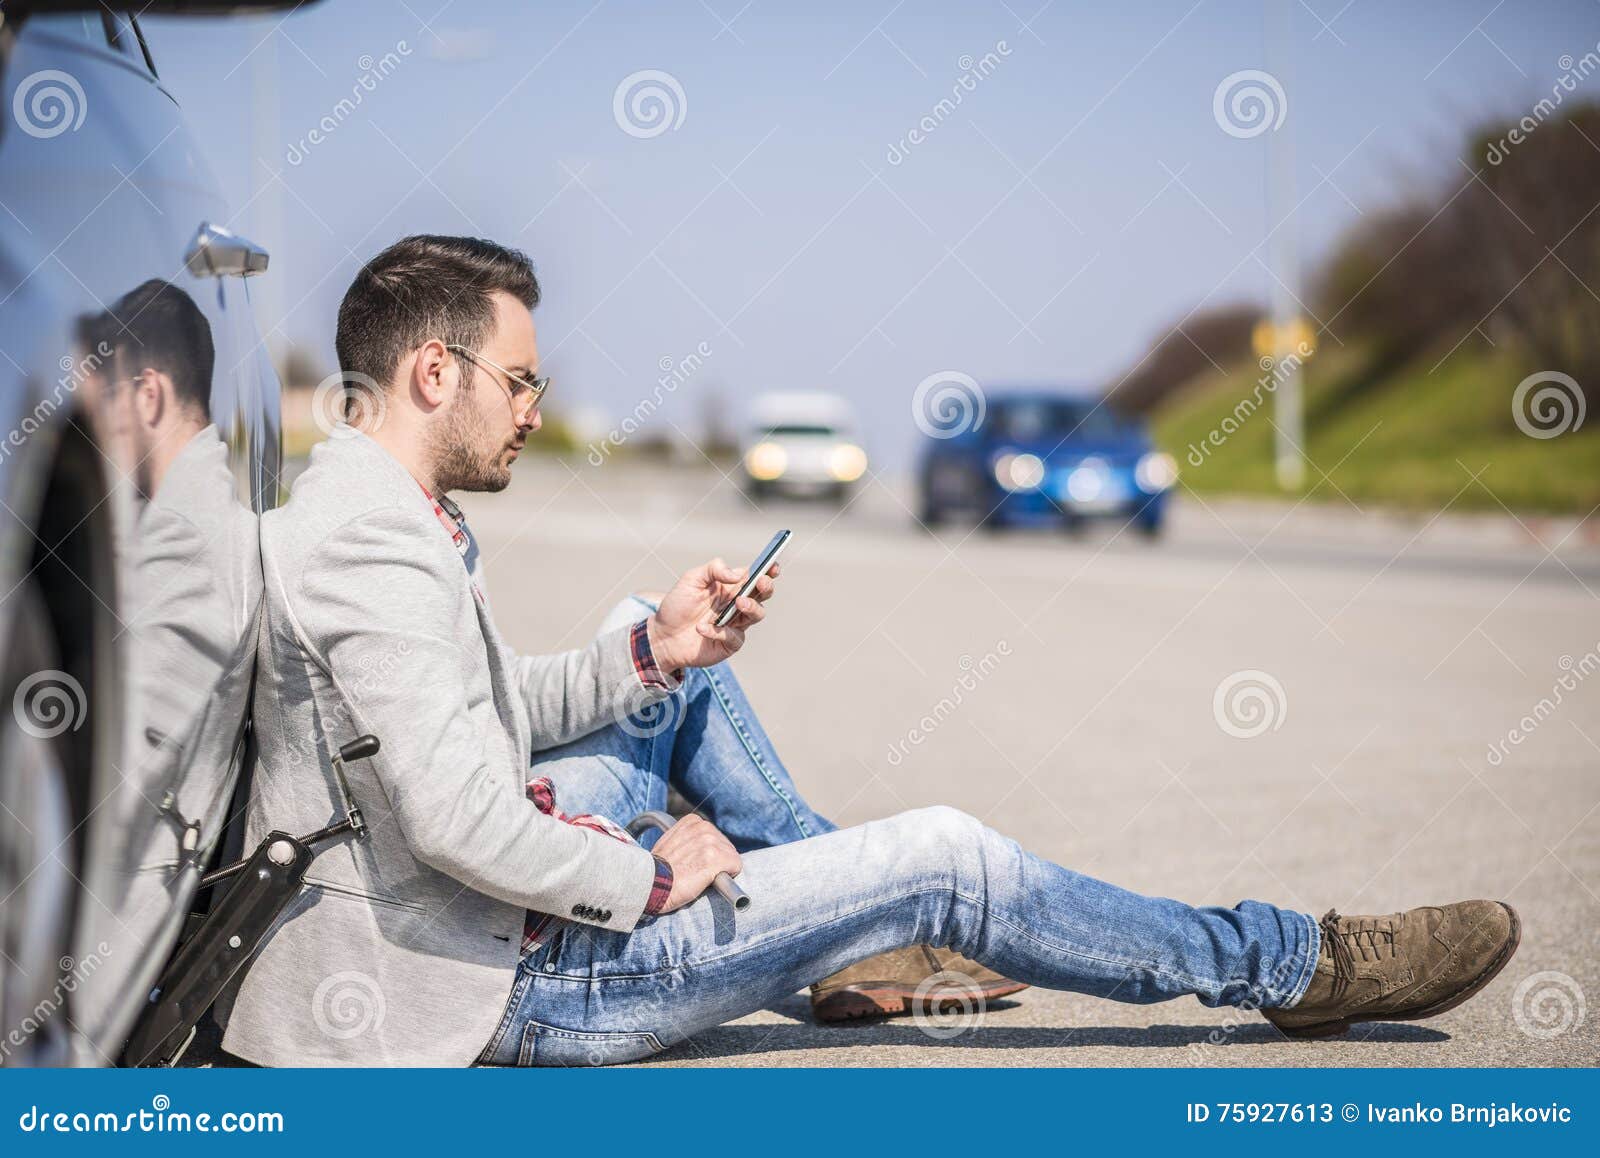 young man with a silver car that broke down on the road